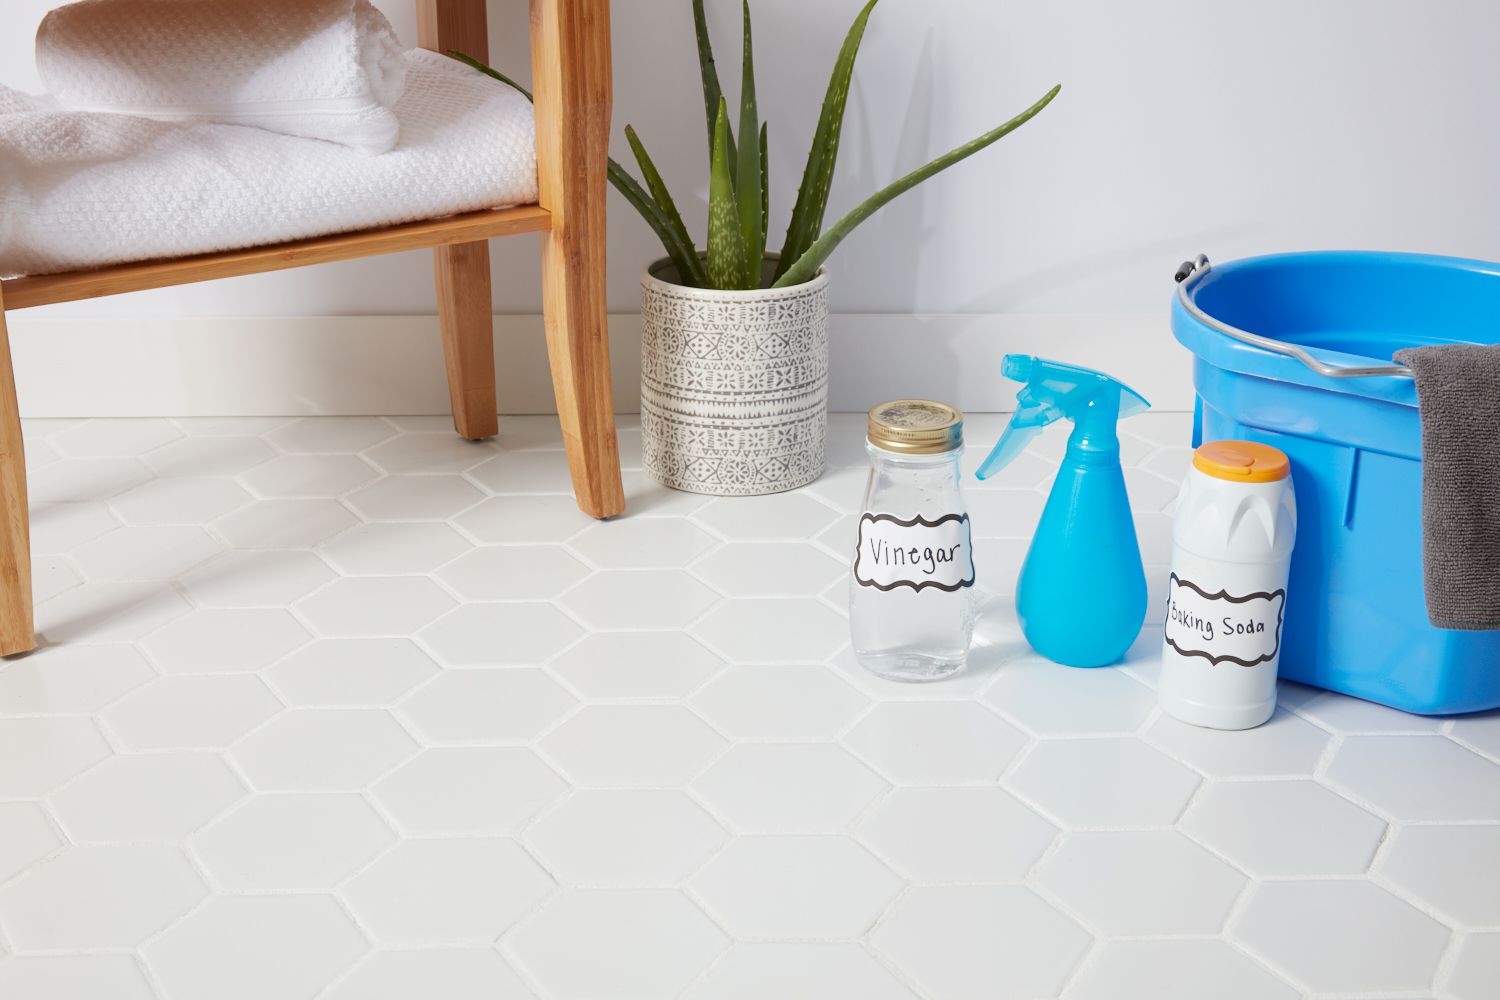 Porcelain Tiles - Easy Cleaning and Maintenance